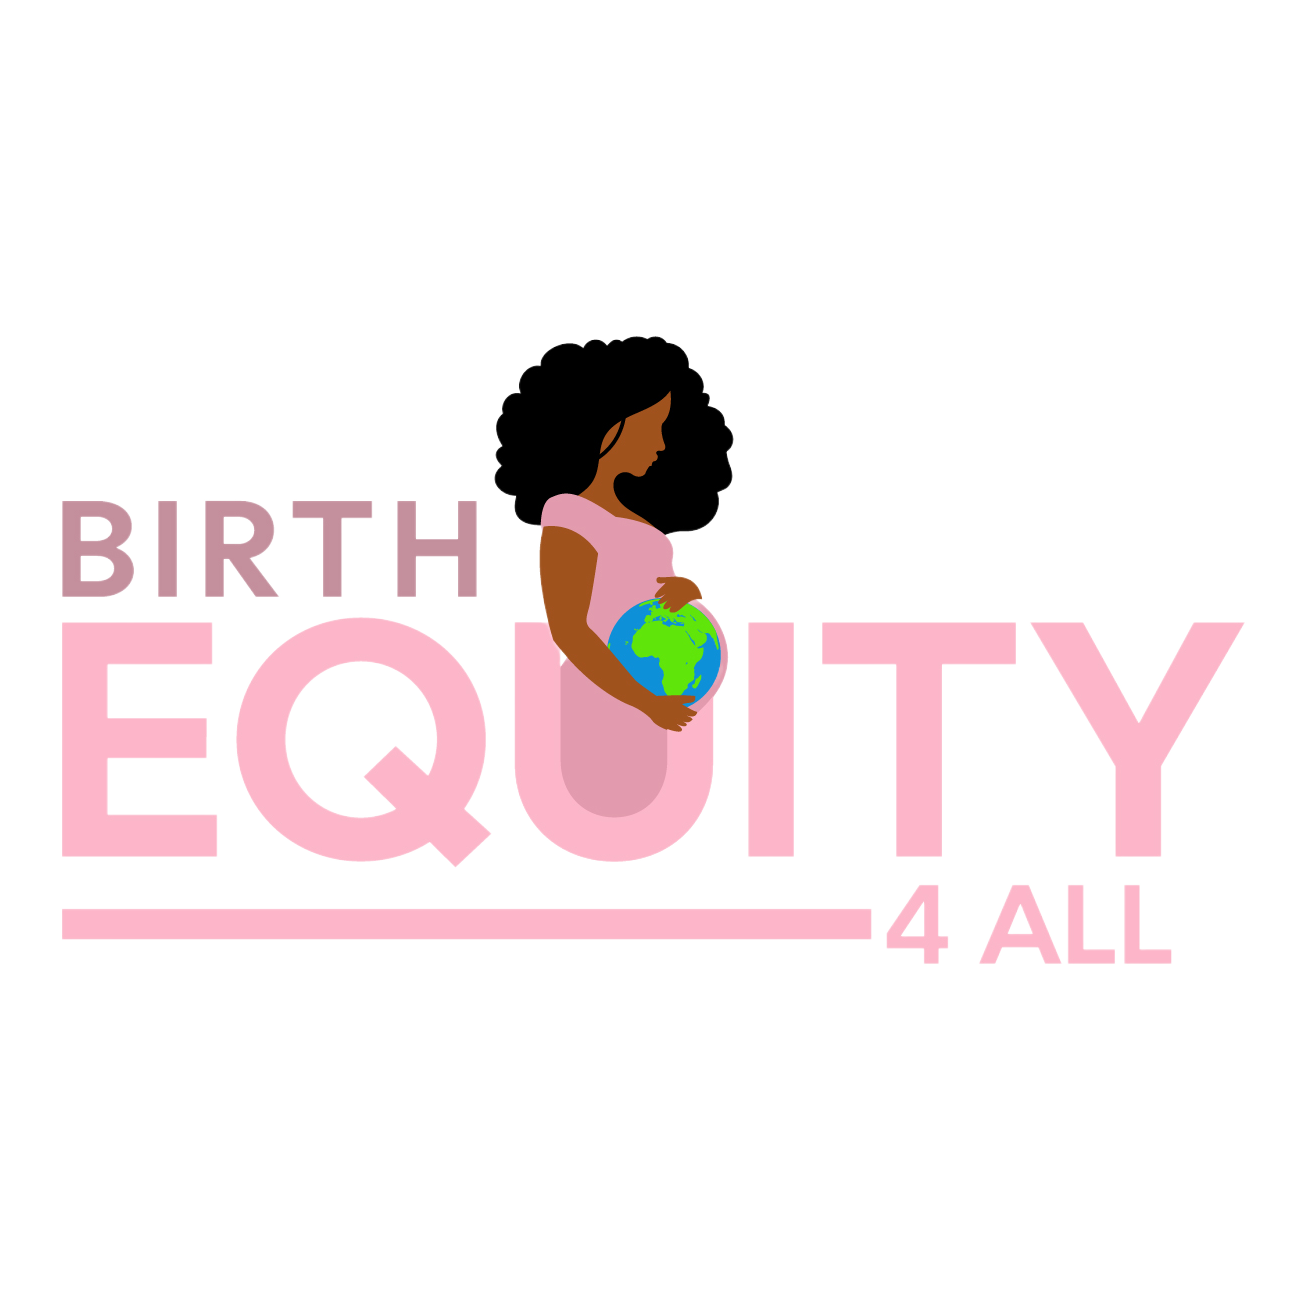 Birth Equity 4 All